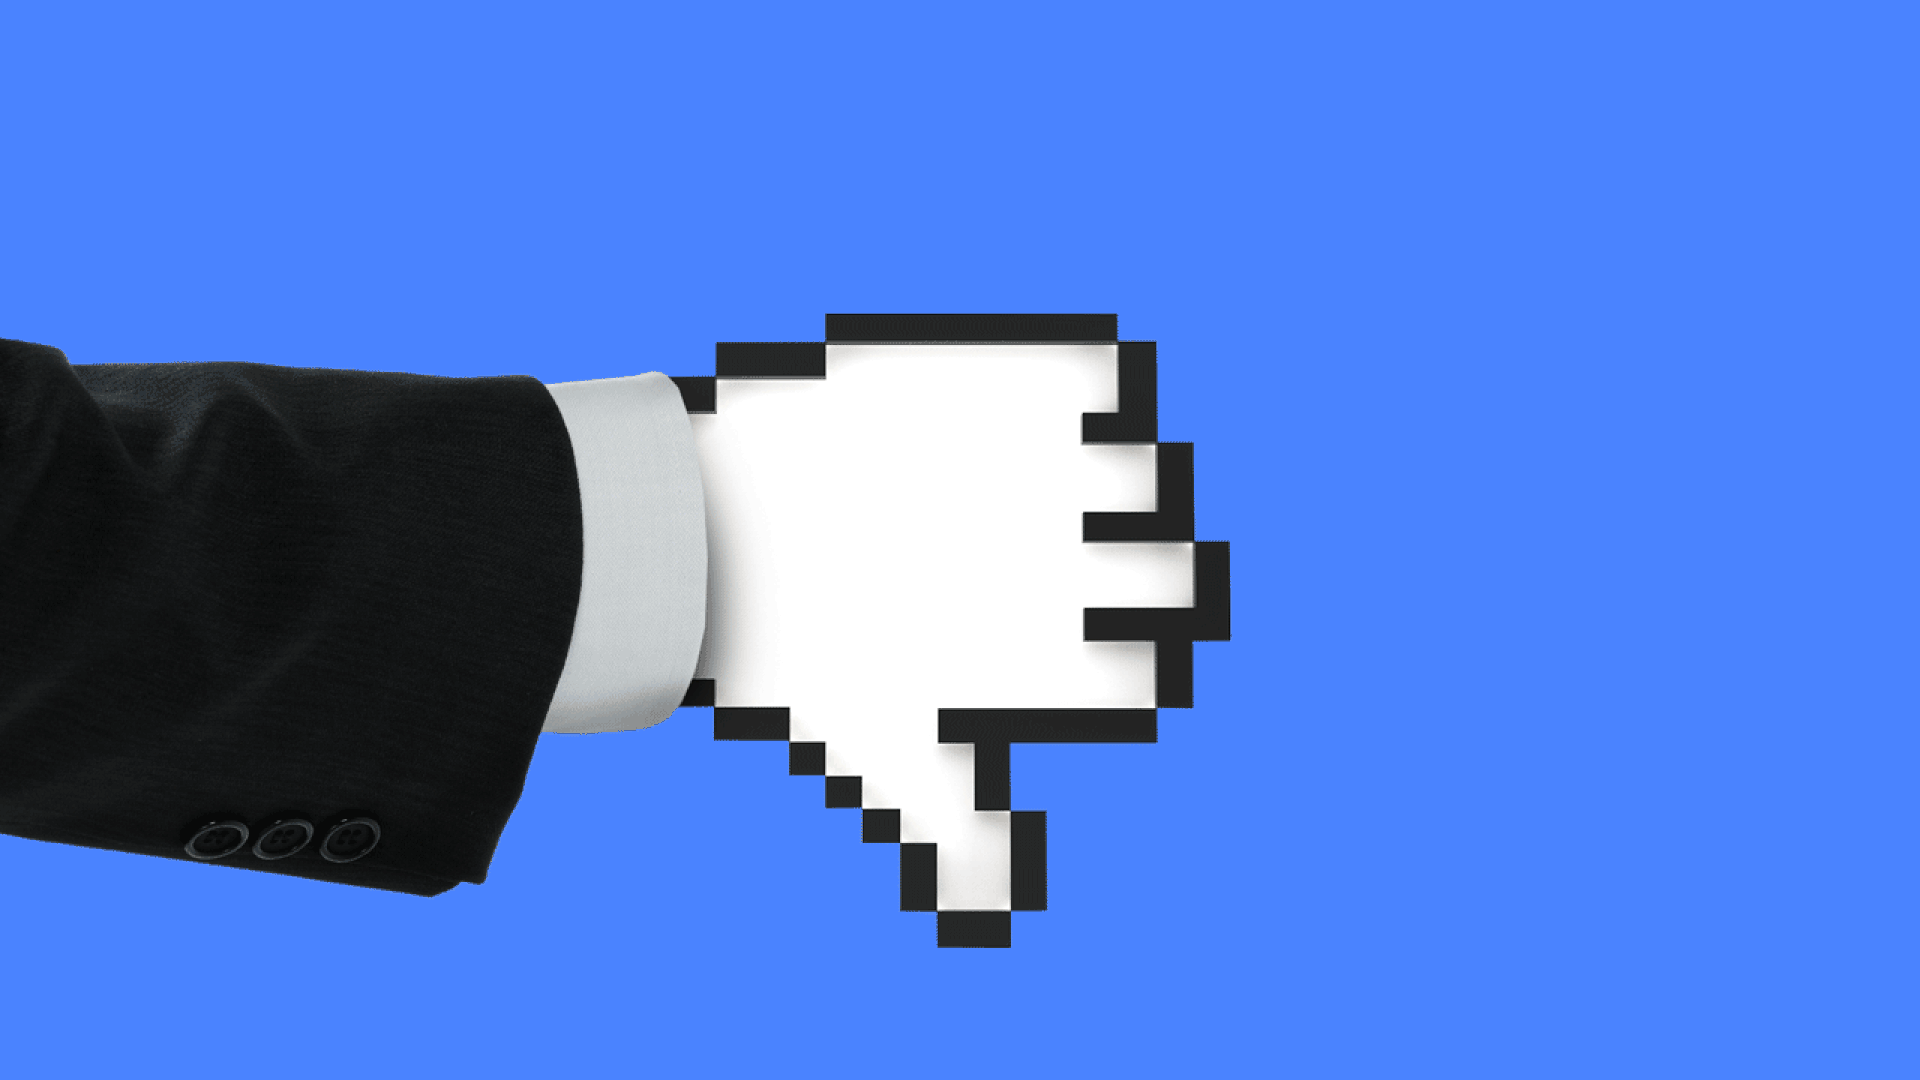 Illustration of a hand moving between thumbs up and thumbs down.